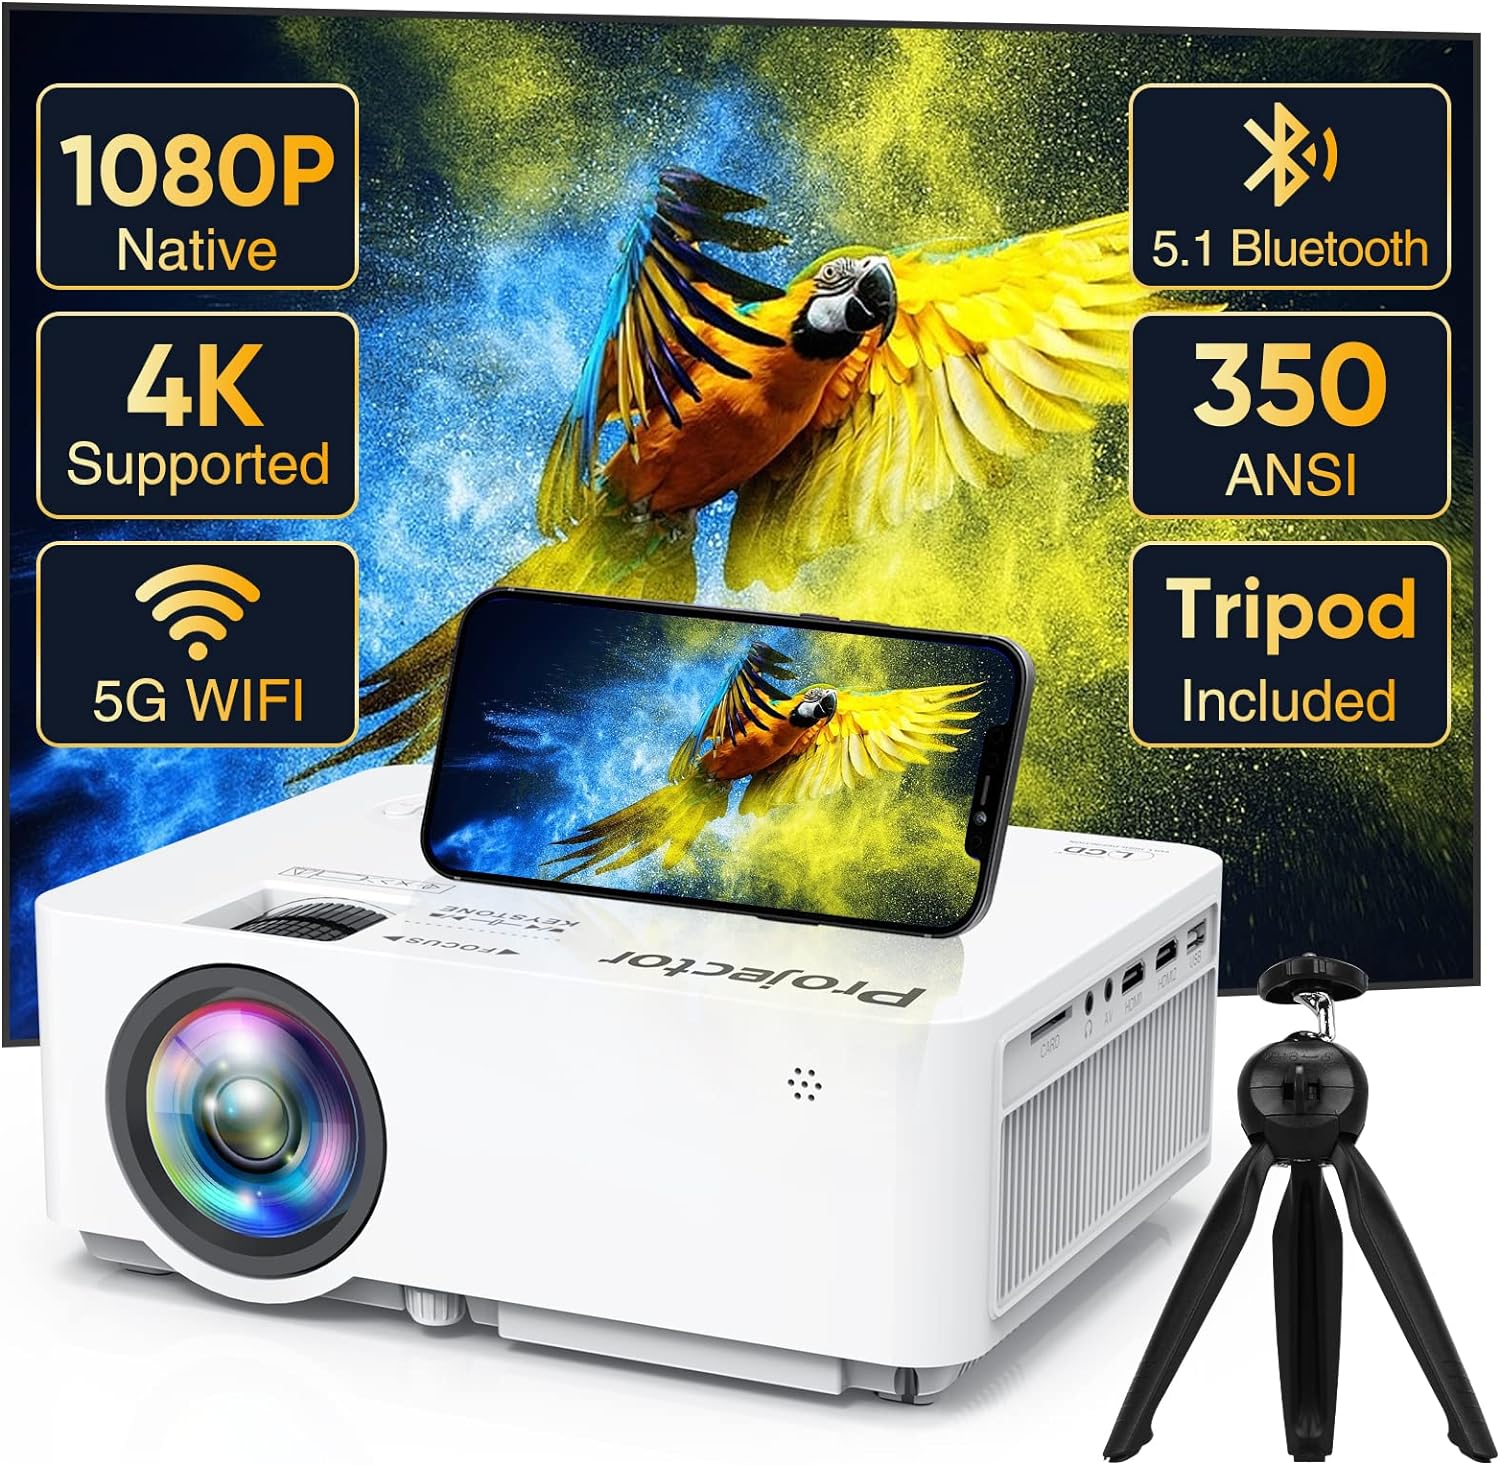 Native 1080P Projector with 5G WiFi Bluetooth (with Tripod), 14000L 4K Supported Home Projector, Portable Outdoor Projector with Max 300 Display, Movie Projector Compatible with TV Stick, HDMI, Phone